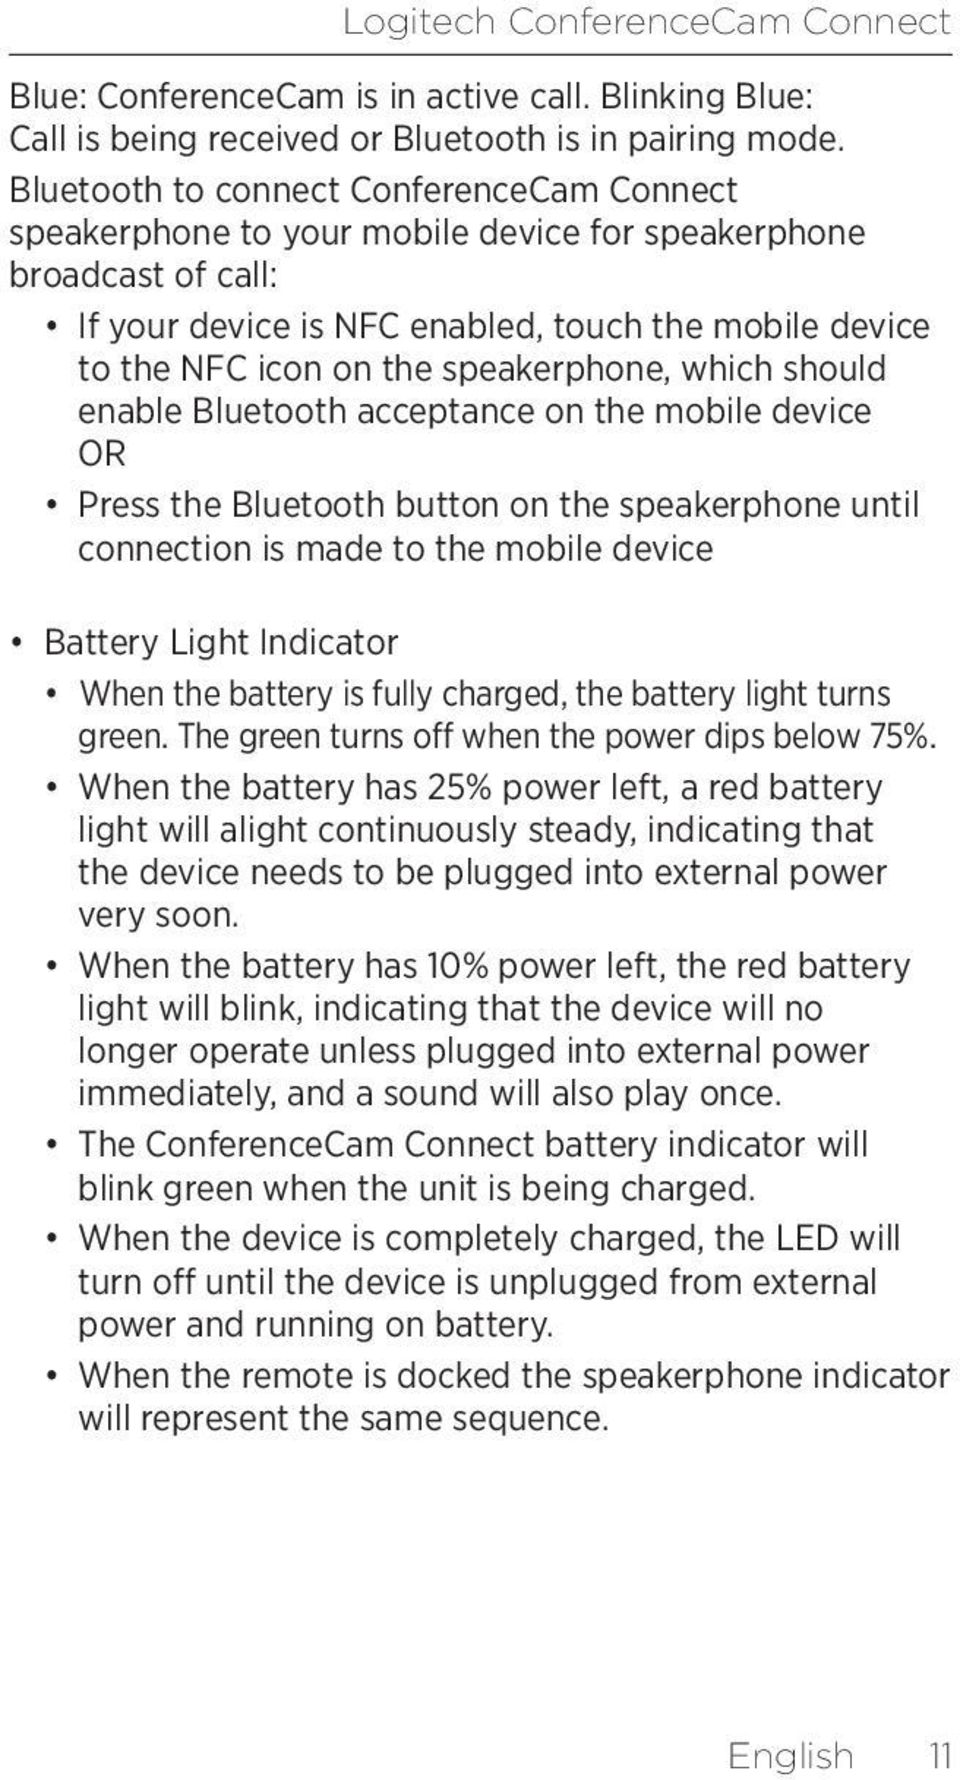 speakerphone, which should enable Bluetooth acceptance on the mobile device OR Press the Bluetooth button on the speakerphone until connection is made to the mobile device Battery Light Indicator